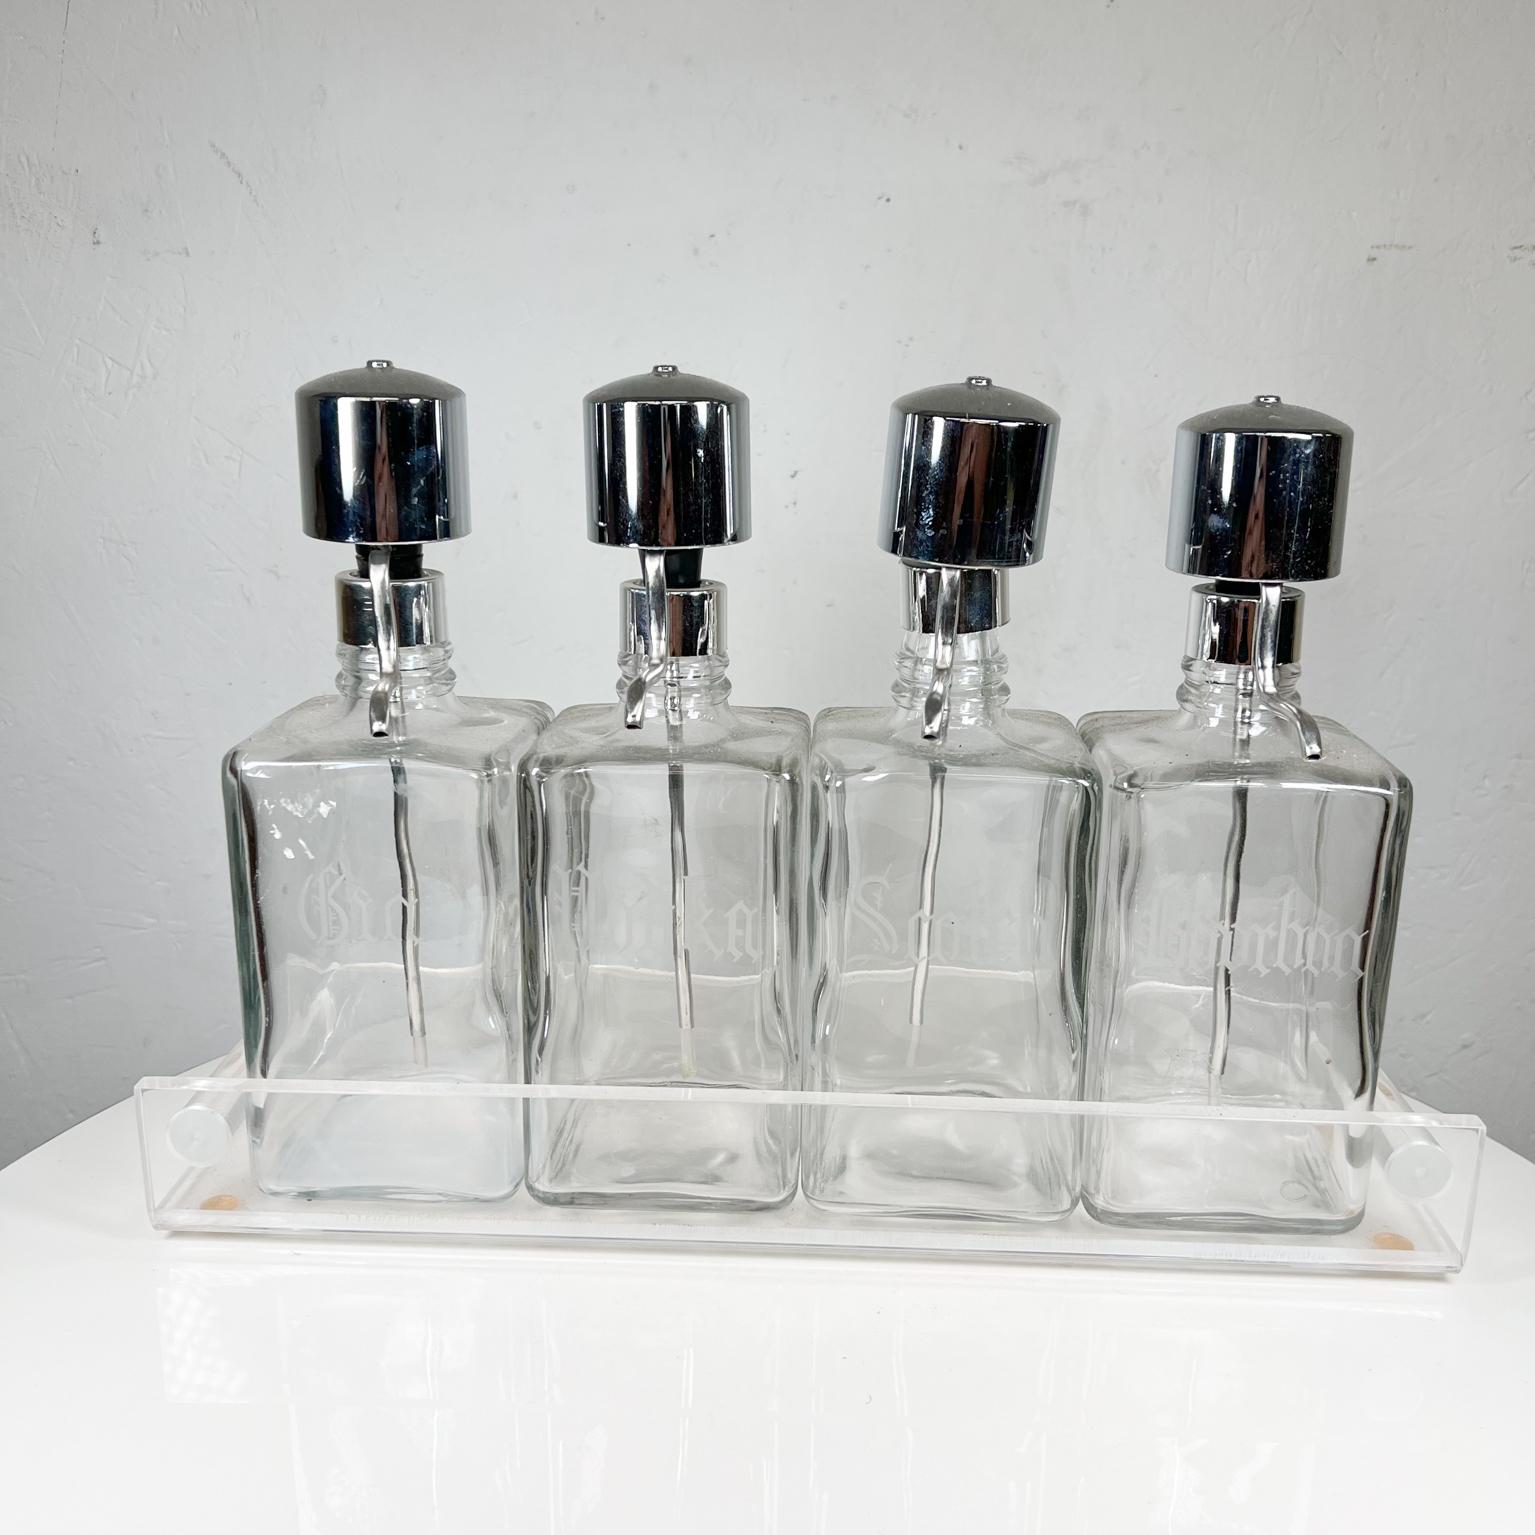 Set of Four Dispenser Liquor Bottles Scotch Bourbon Gin Vodka Etching
16.75 w x 4.5 d x 11.25 tall
Each bottle 3.63 x 3.63 x 10.5 tall
Set of 4 liquor bottles with chrome push dispenser in a Lucite Caddy
No information on maker
Preowned vintage